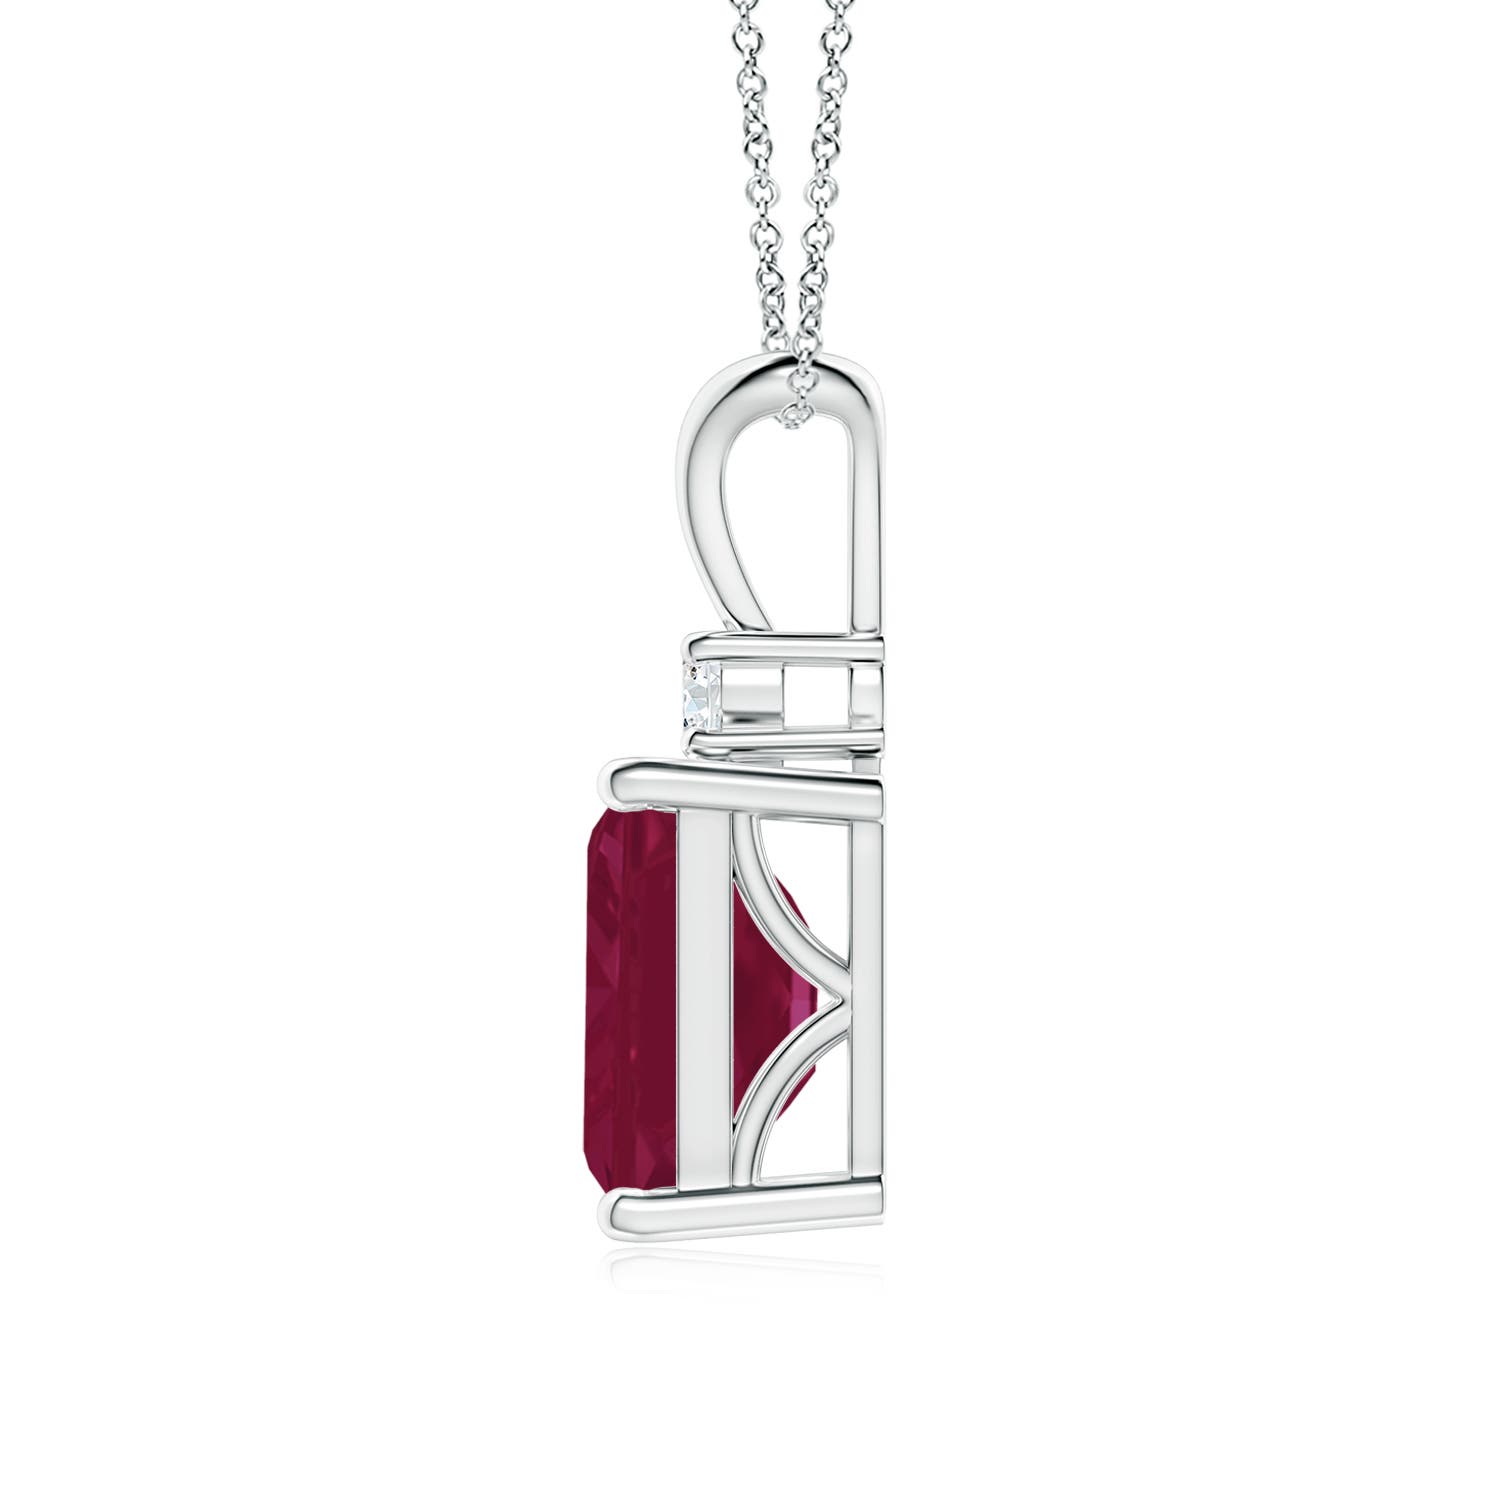 A - Ruby / 3.07 CT / 14 KT White Gold